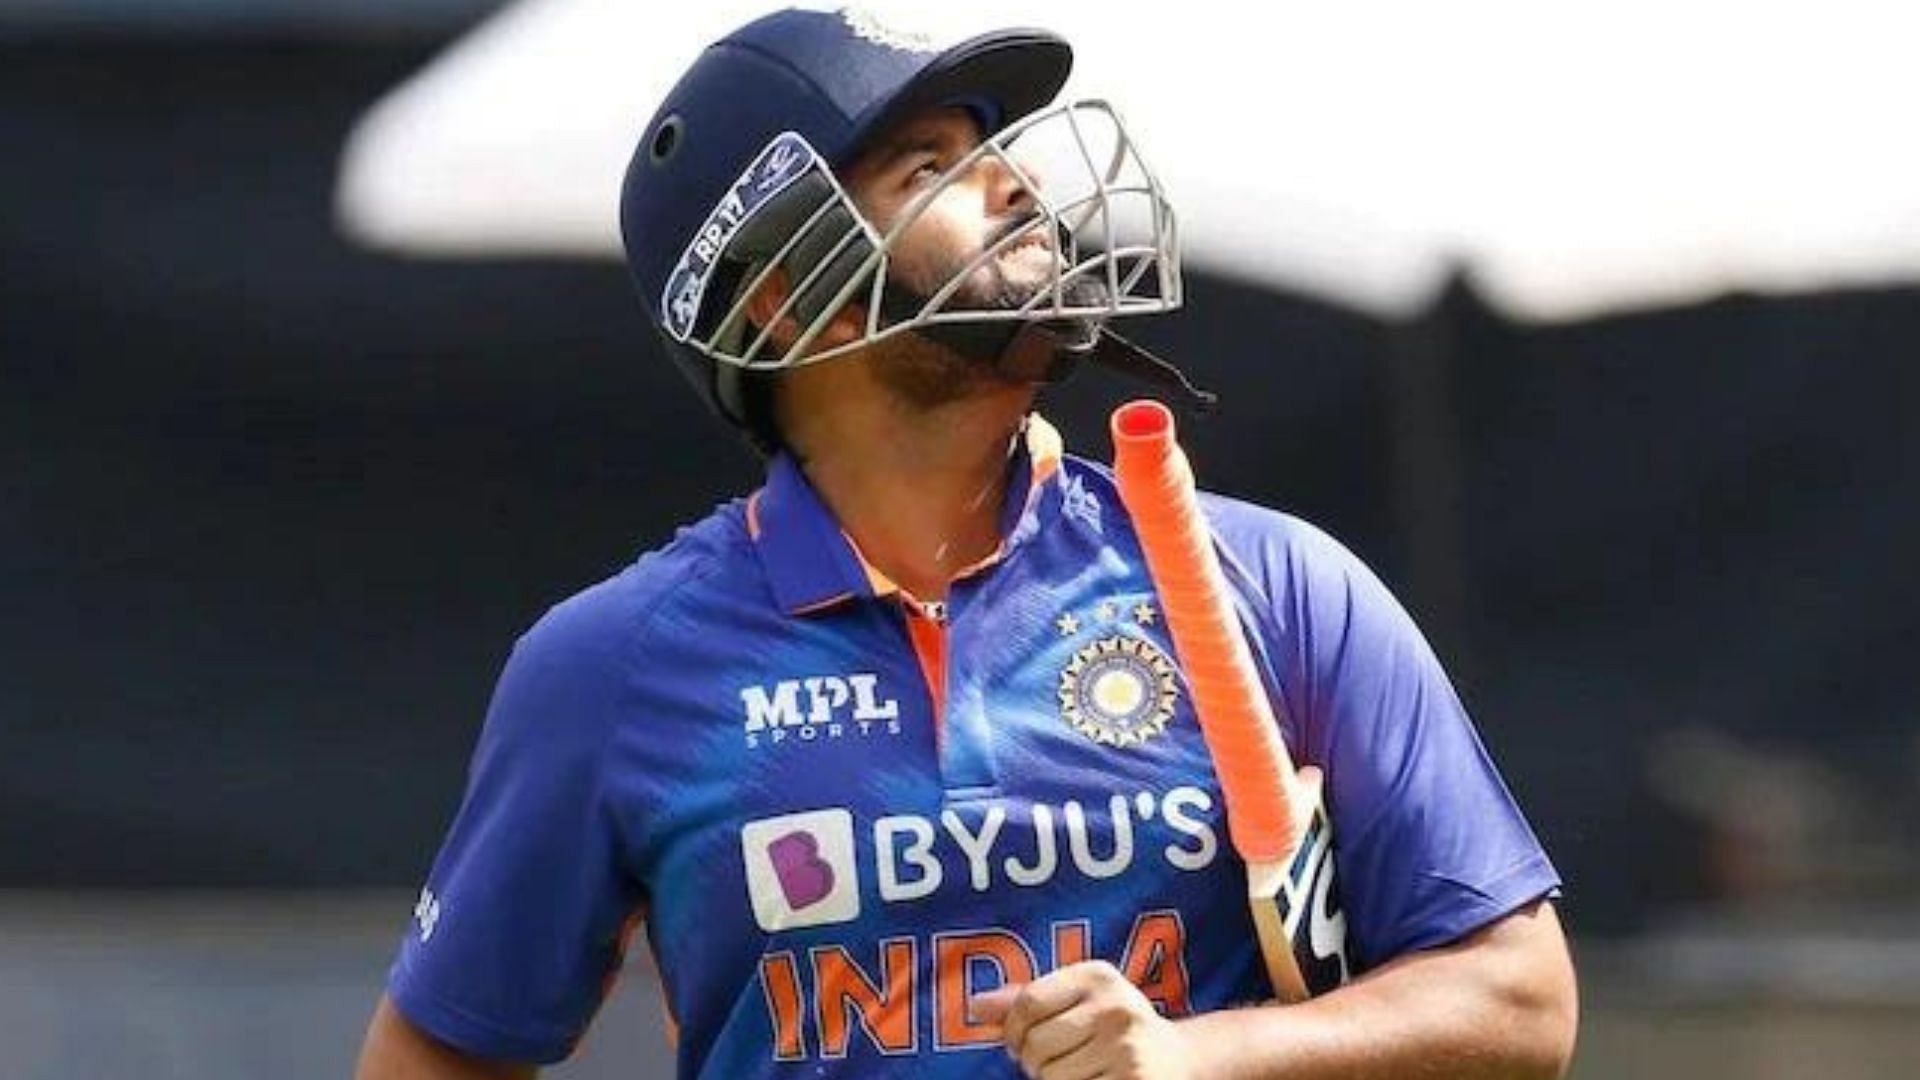 Rishabh Pant will become the eighth T20I captain of India. (Credit: BCCI)